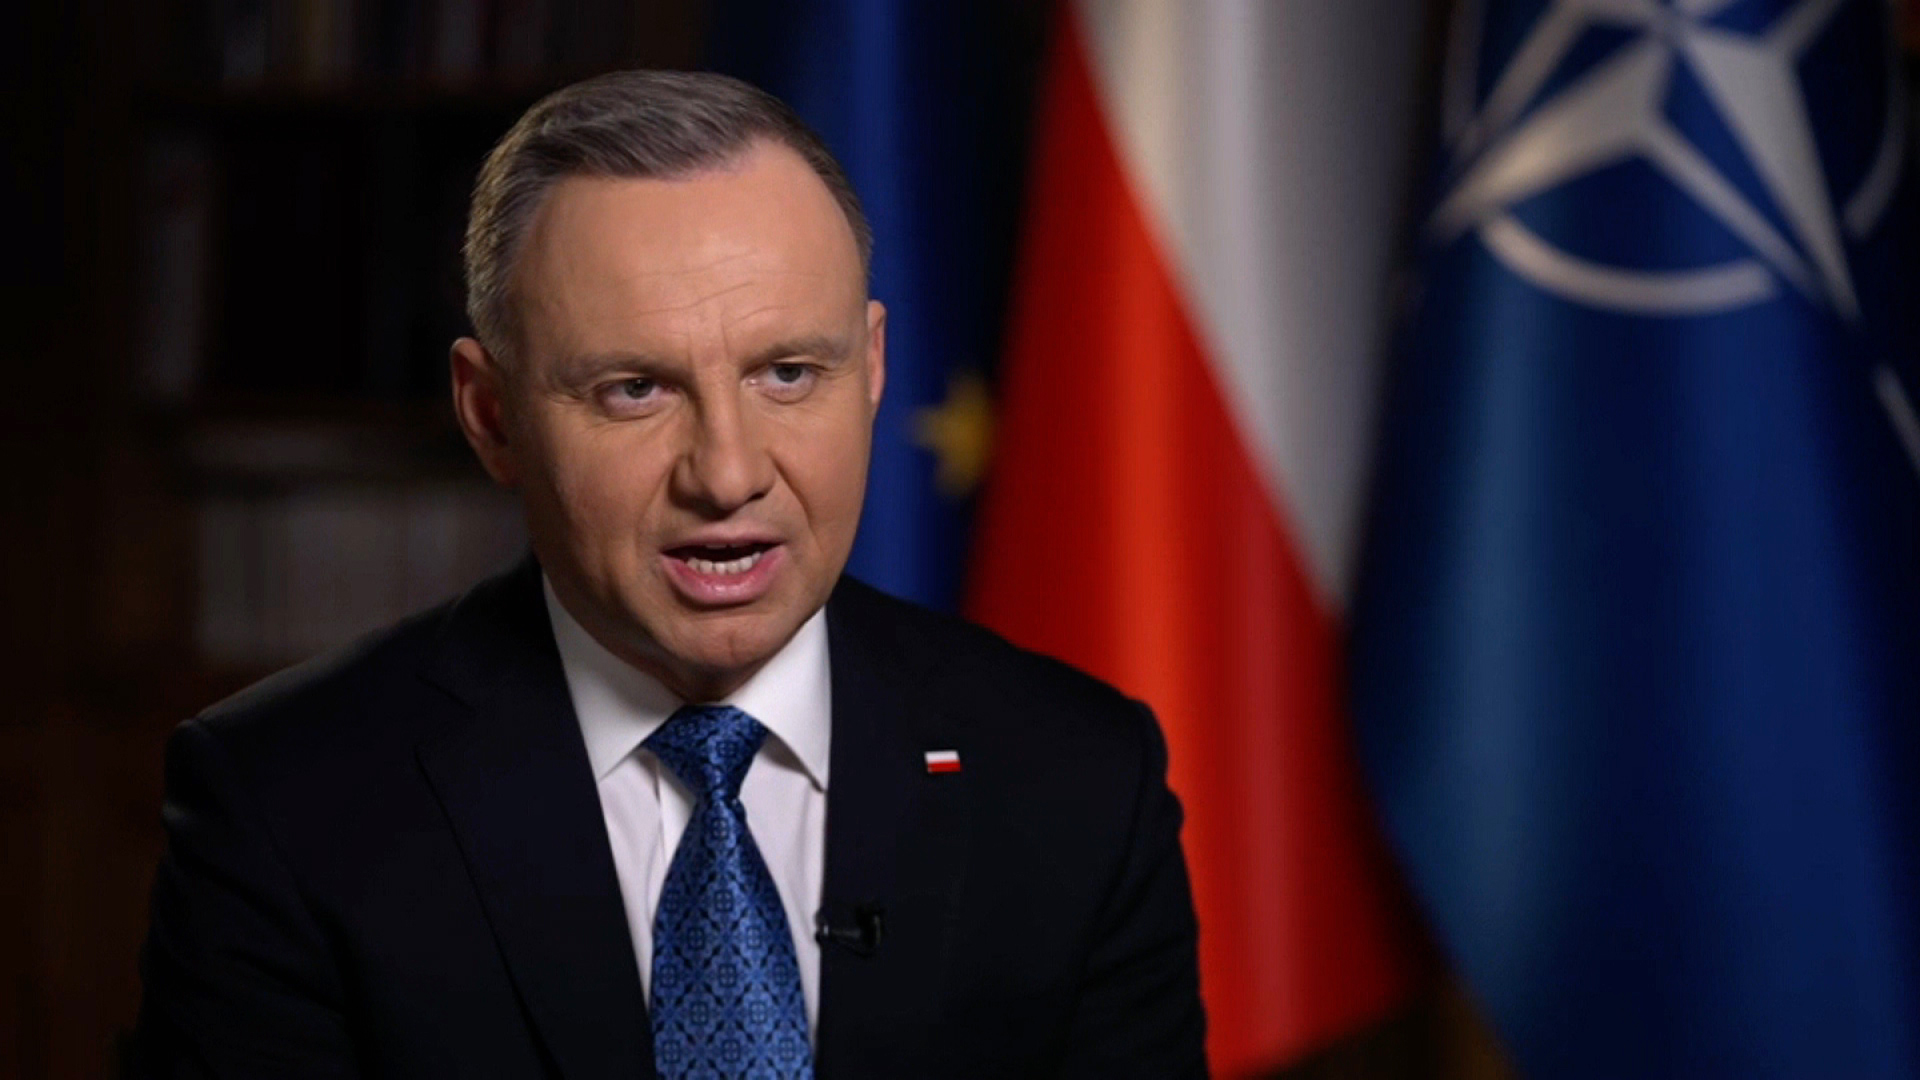 Poland's President Andrzej Duda speaks to CNN's Christiane Amanpour in an interview.